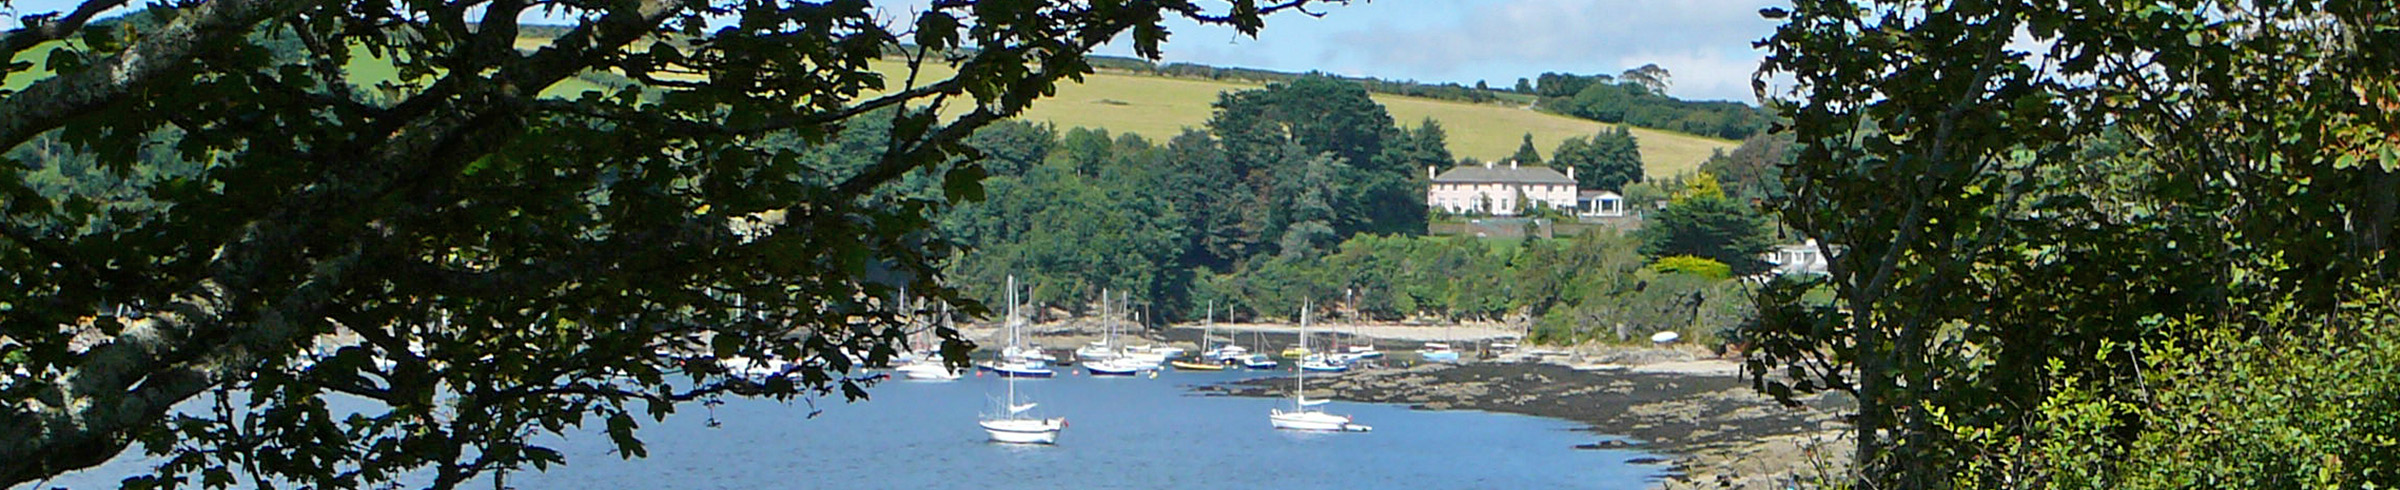 Roseland Creek with Boats